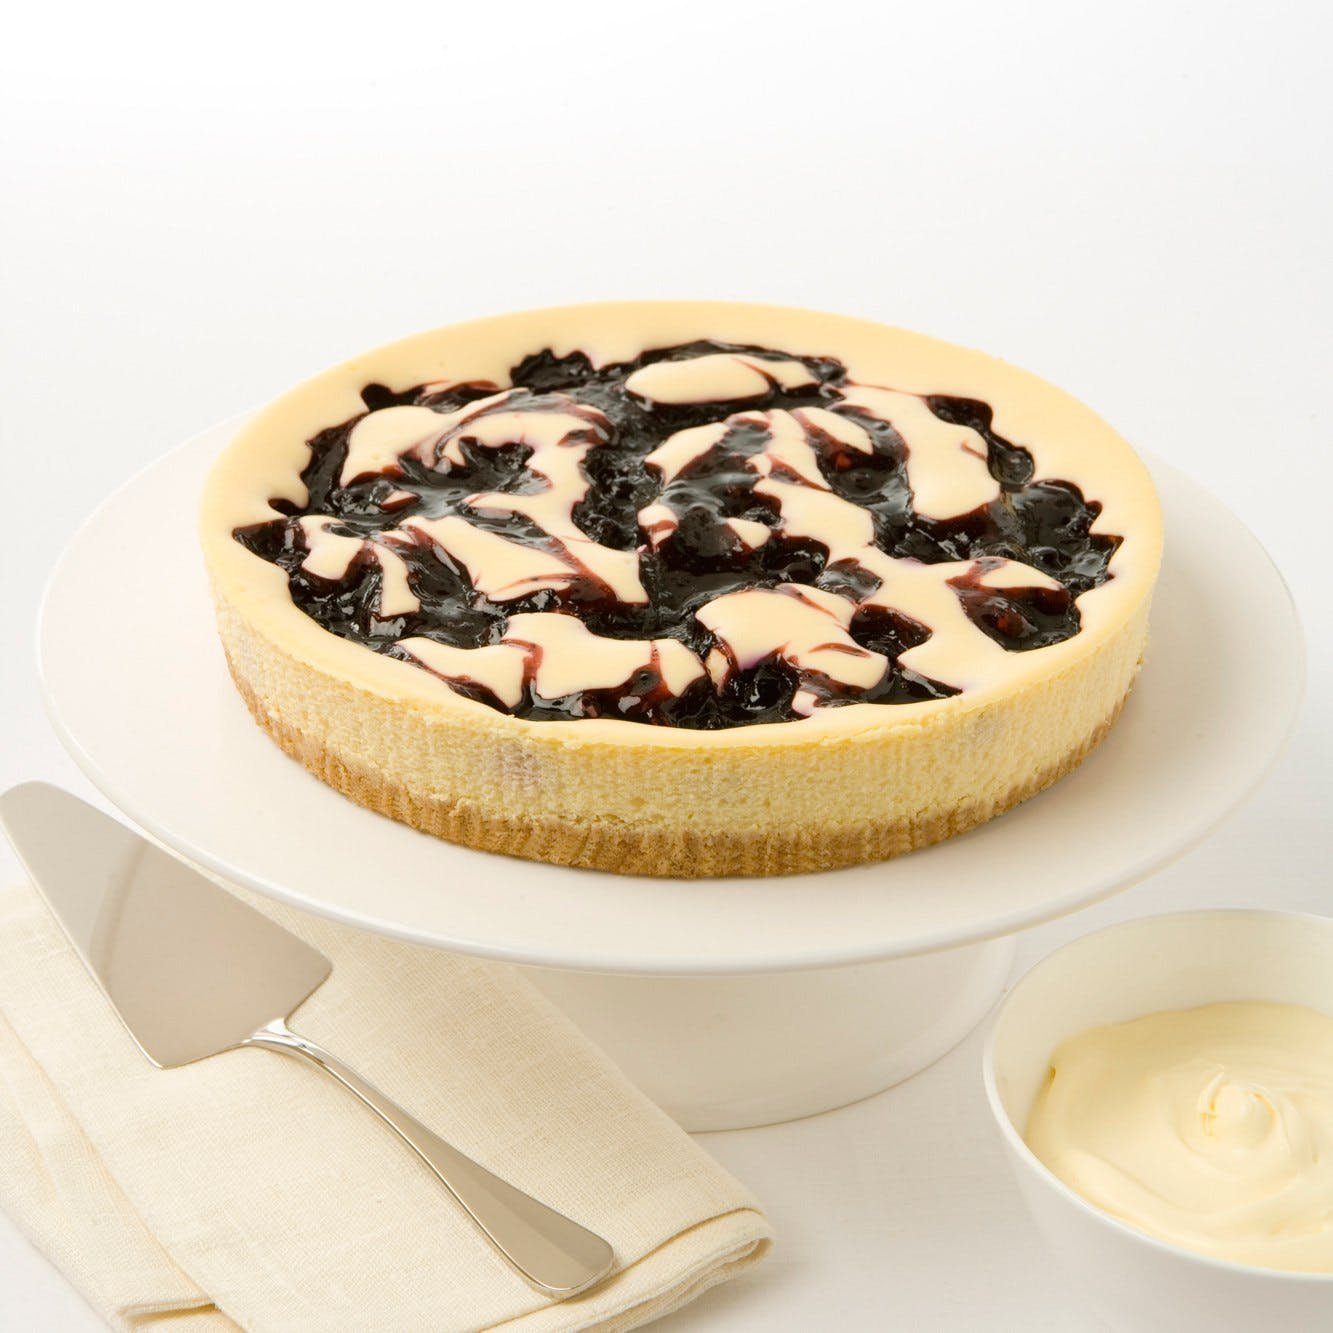 The Cheesecake Shop - Northern Rivers Accommodation